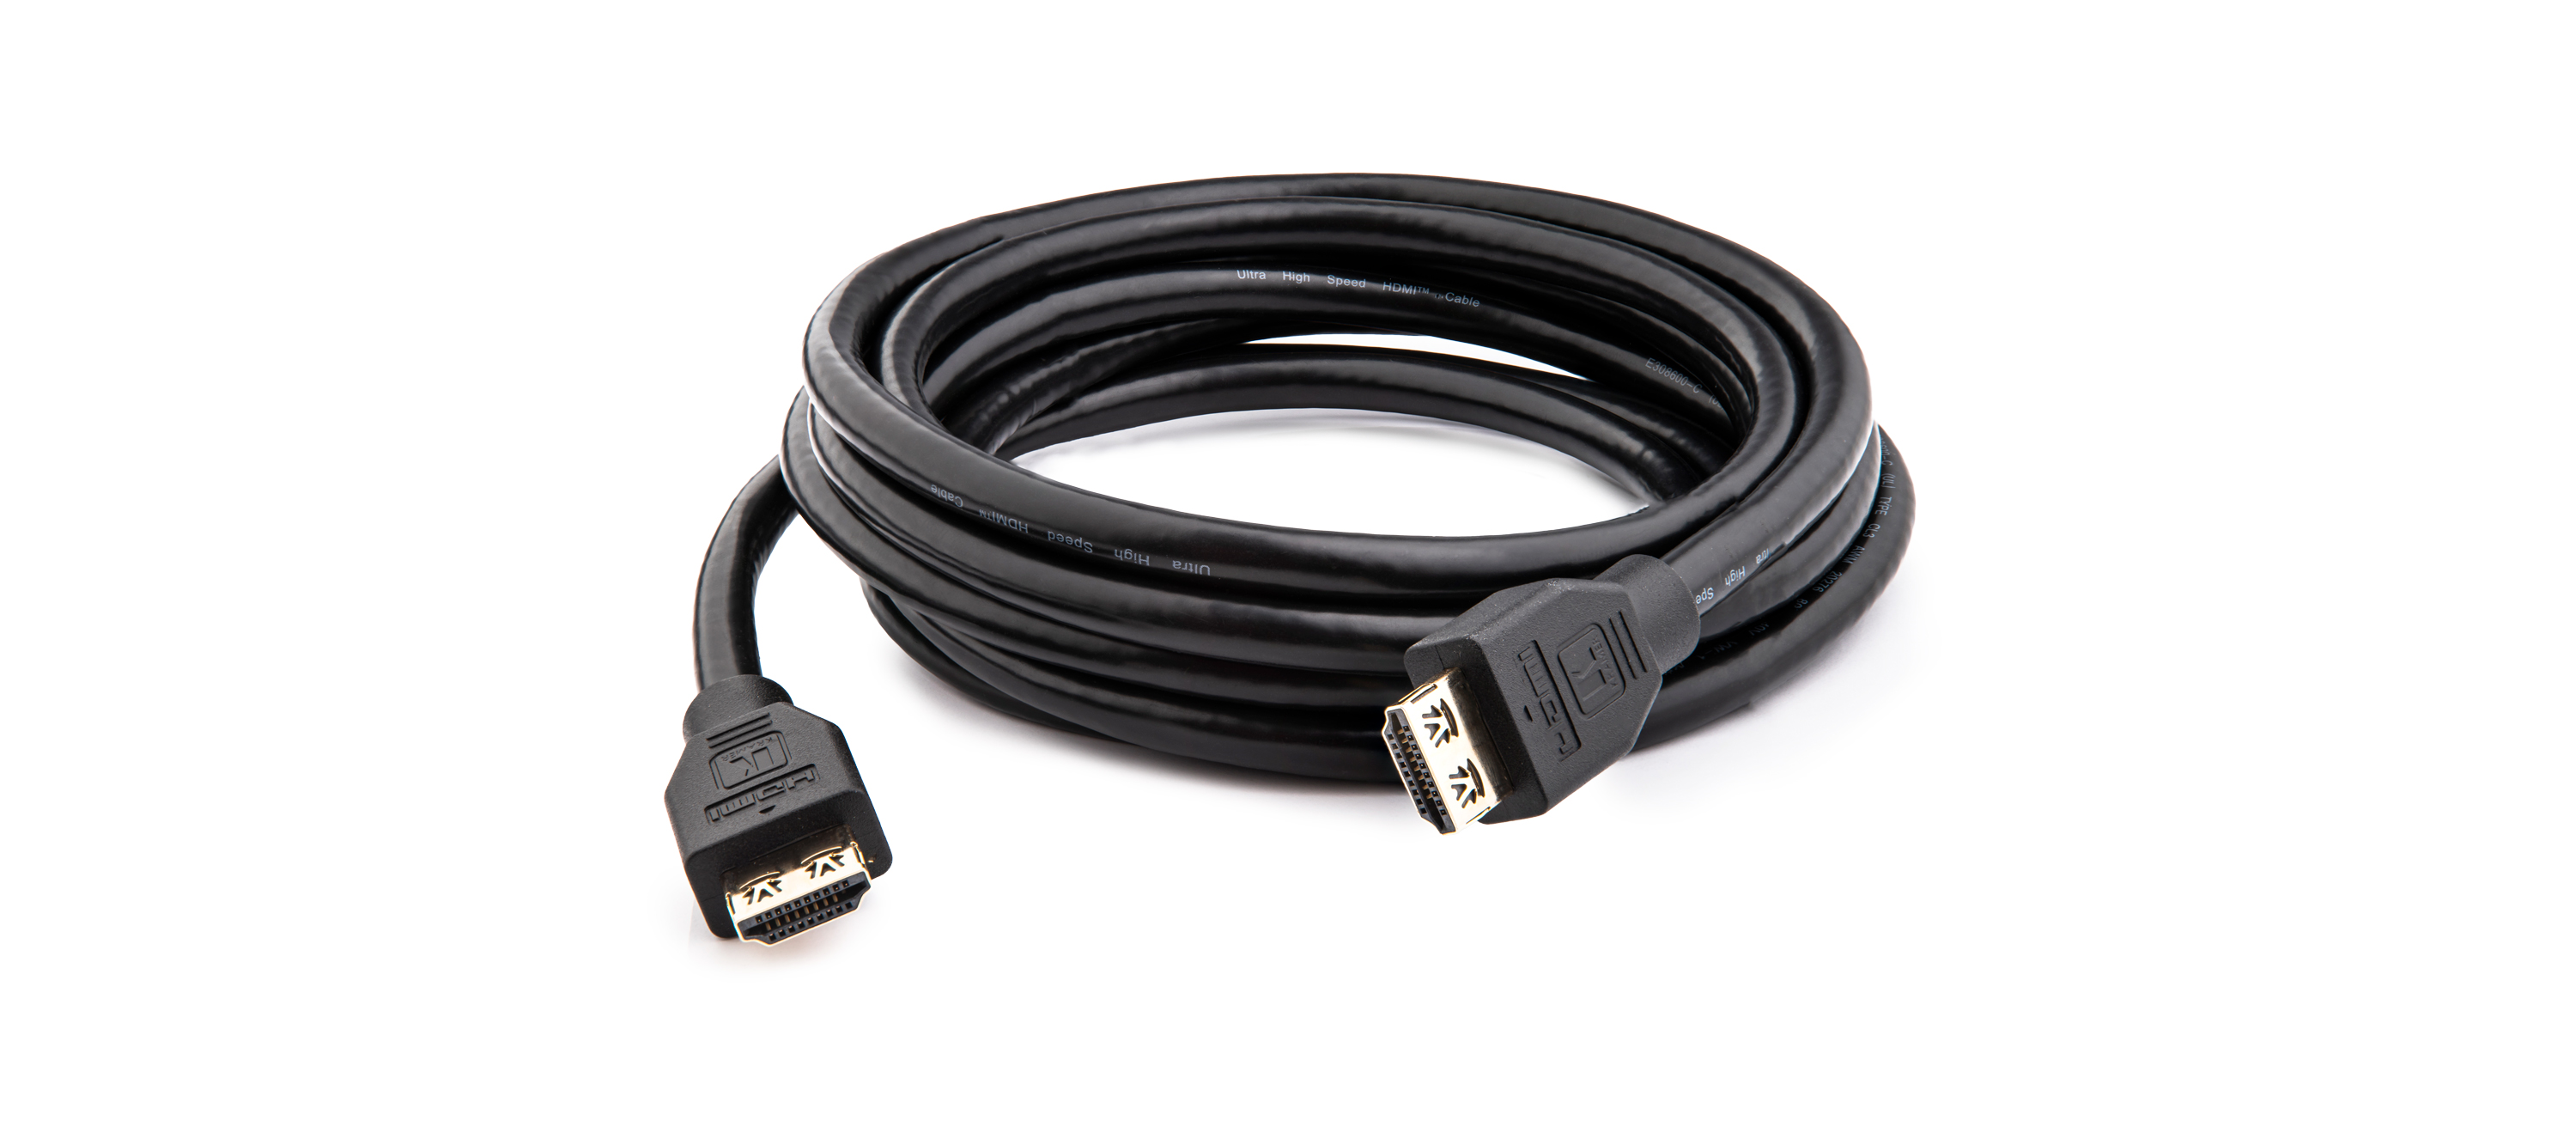 C-HMU-15 Ultra High–Speed HDMI Cable with Ethernet - 15'